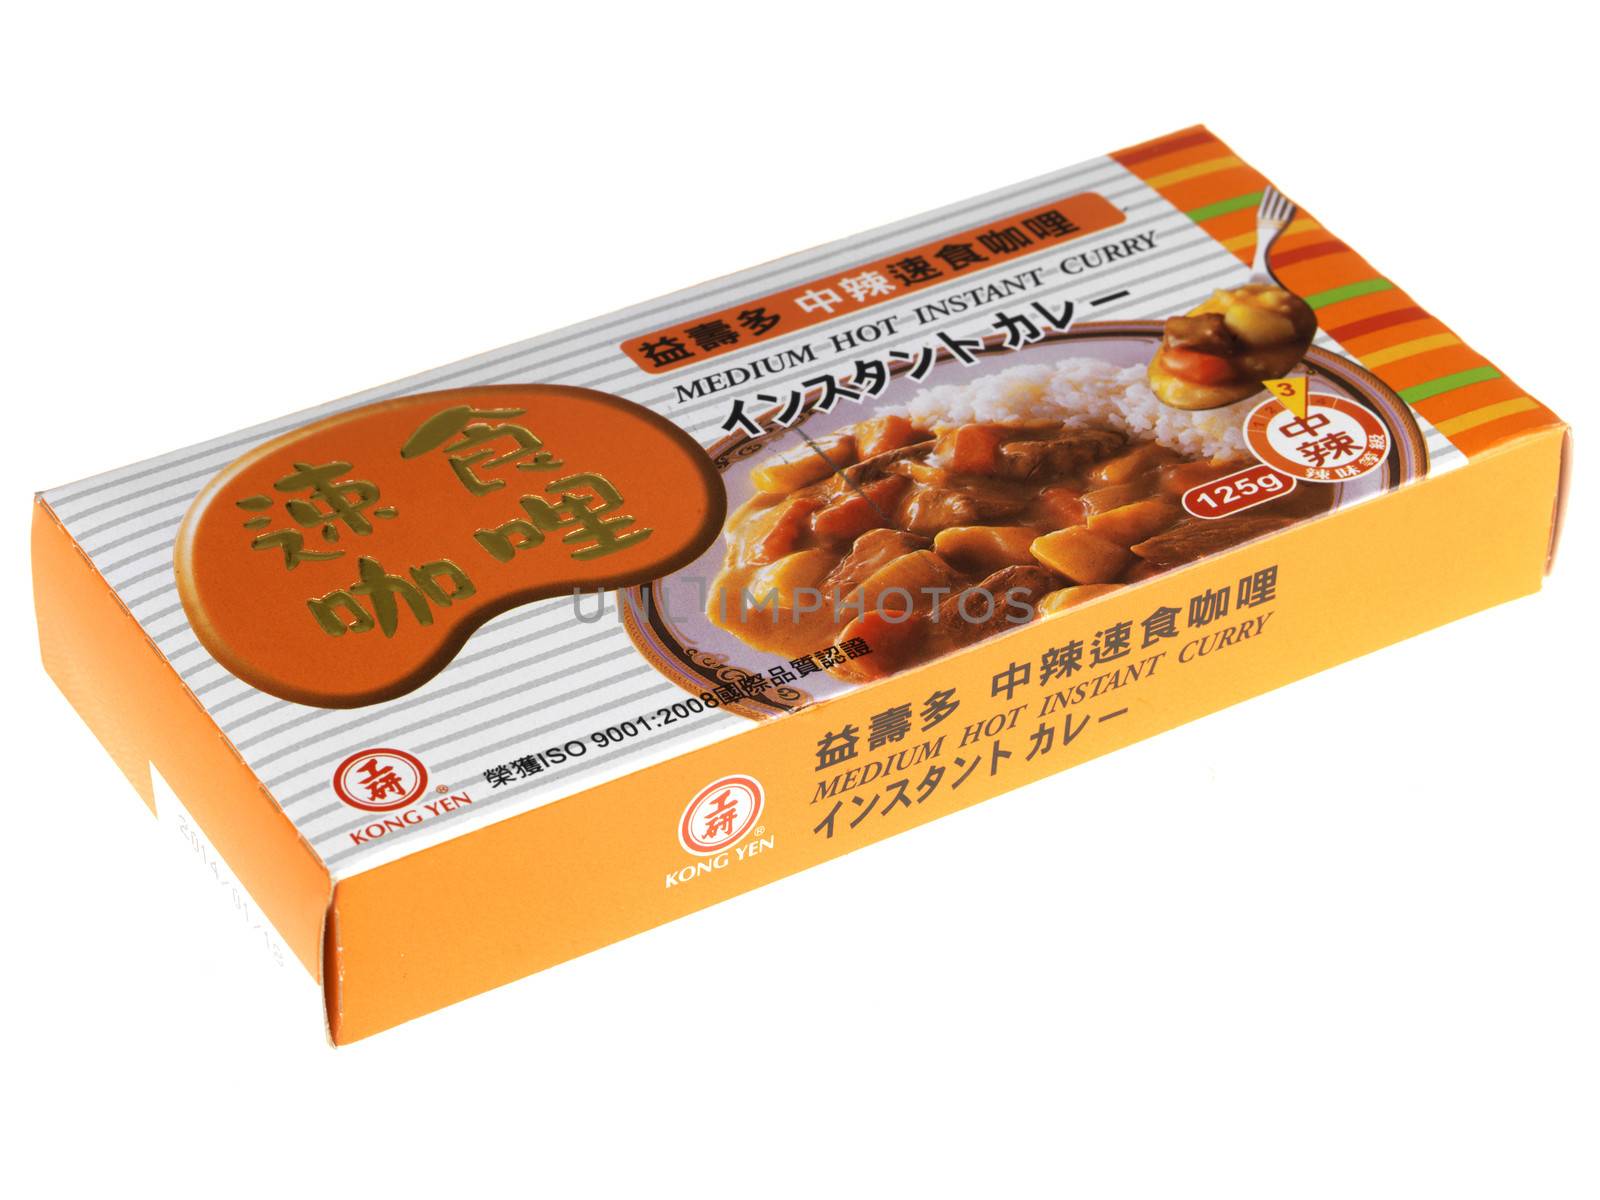 Box of Instant Chinese Curry Paste by Whiteboxmedia